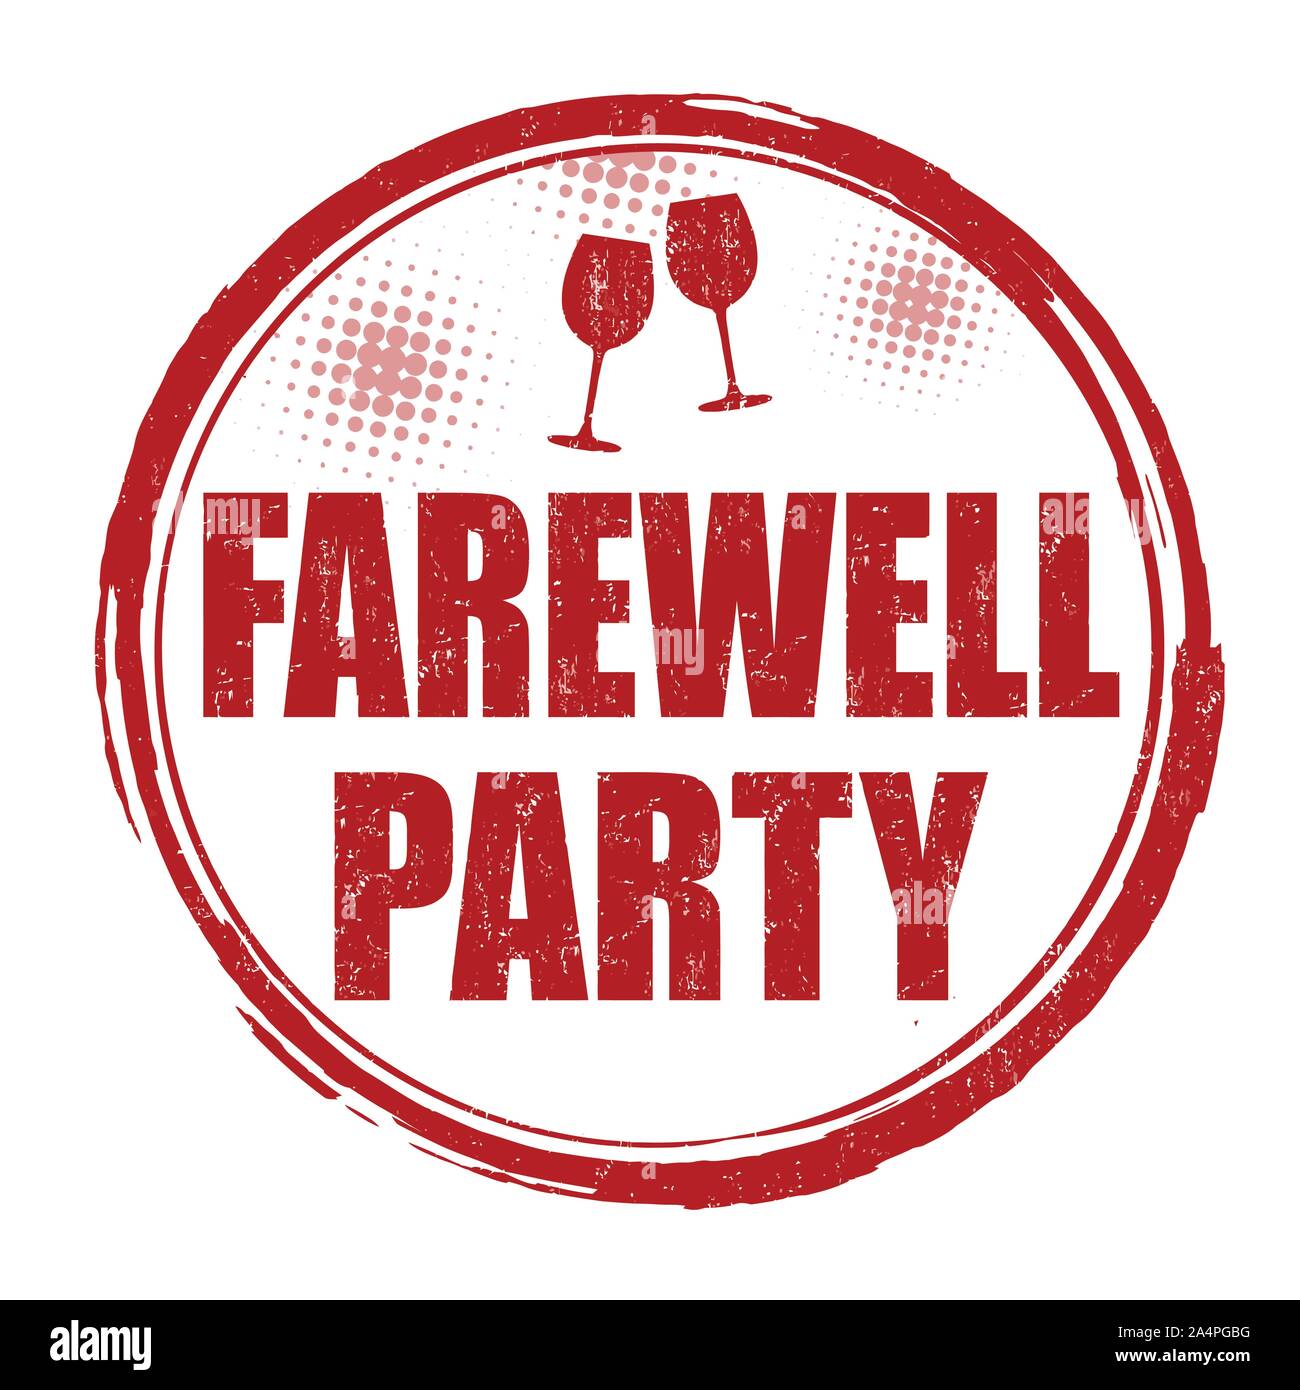 Farewell party banner Cut Out Stock Images & Pictures - Alamy